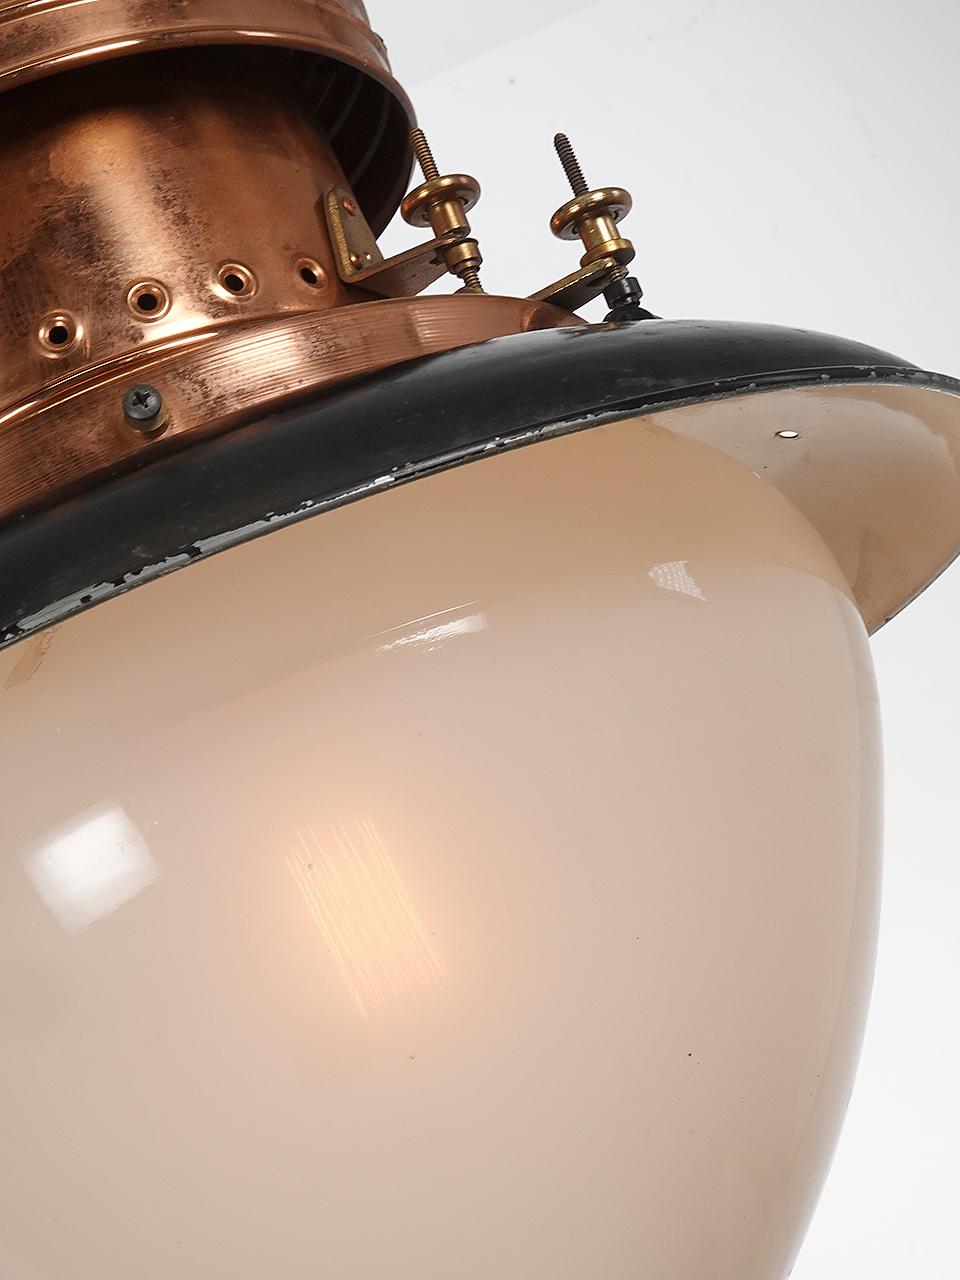 I like the wide compressed look of this early lamp. The impressive acorn globe has a clam broth finish that softens the light and gives a warm glow.